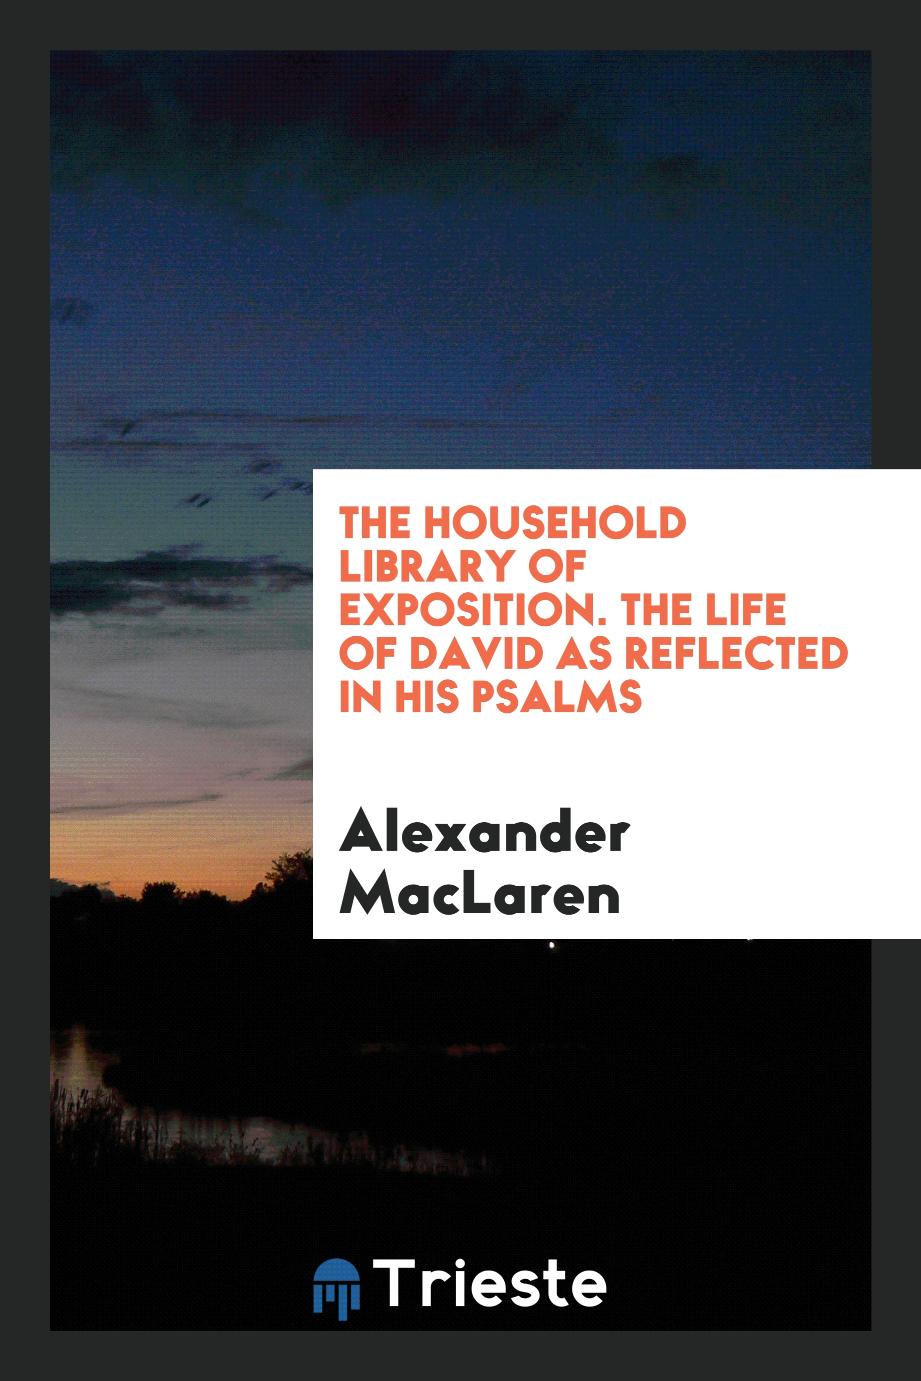 The Household Library of Exposition. The Life of David as Reflected in His Psalms